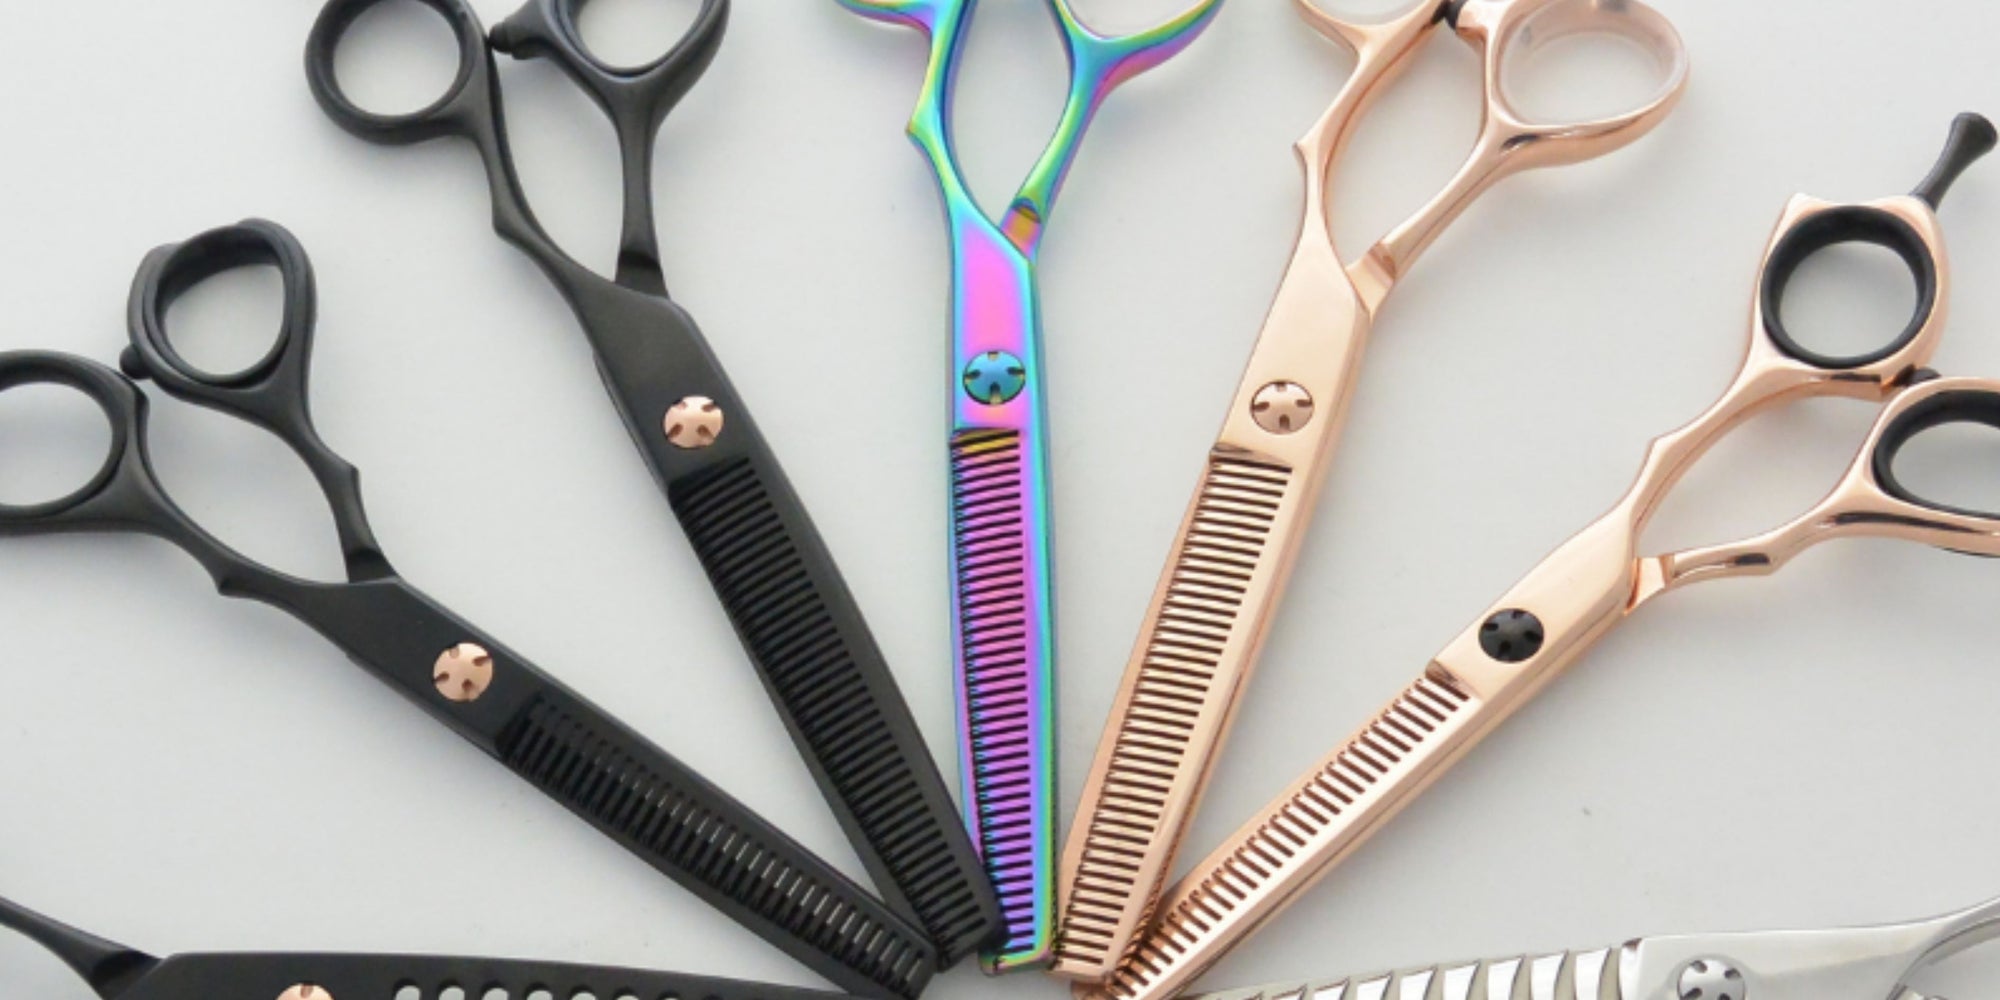 What should you look for in hair cutting scissors?